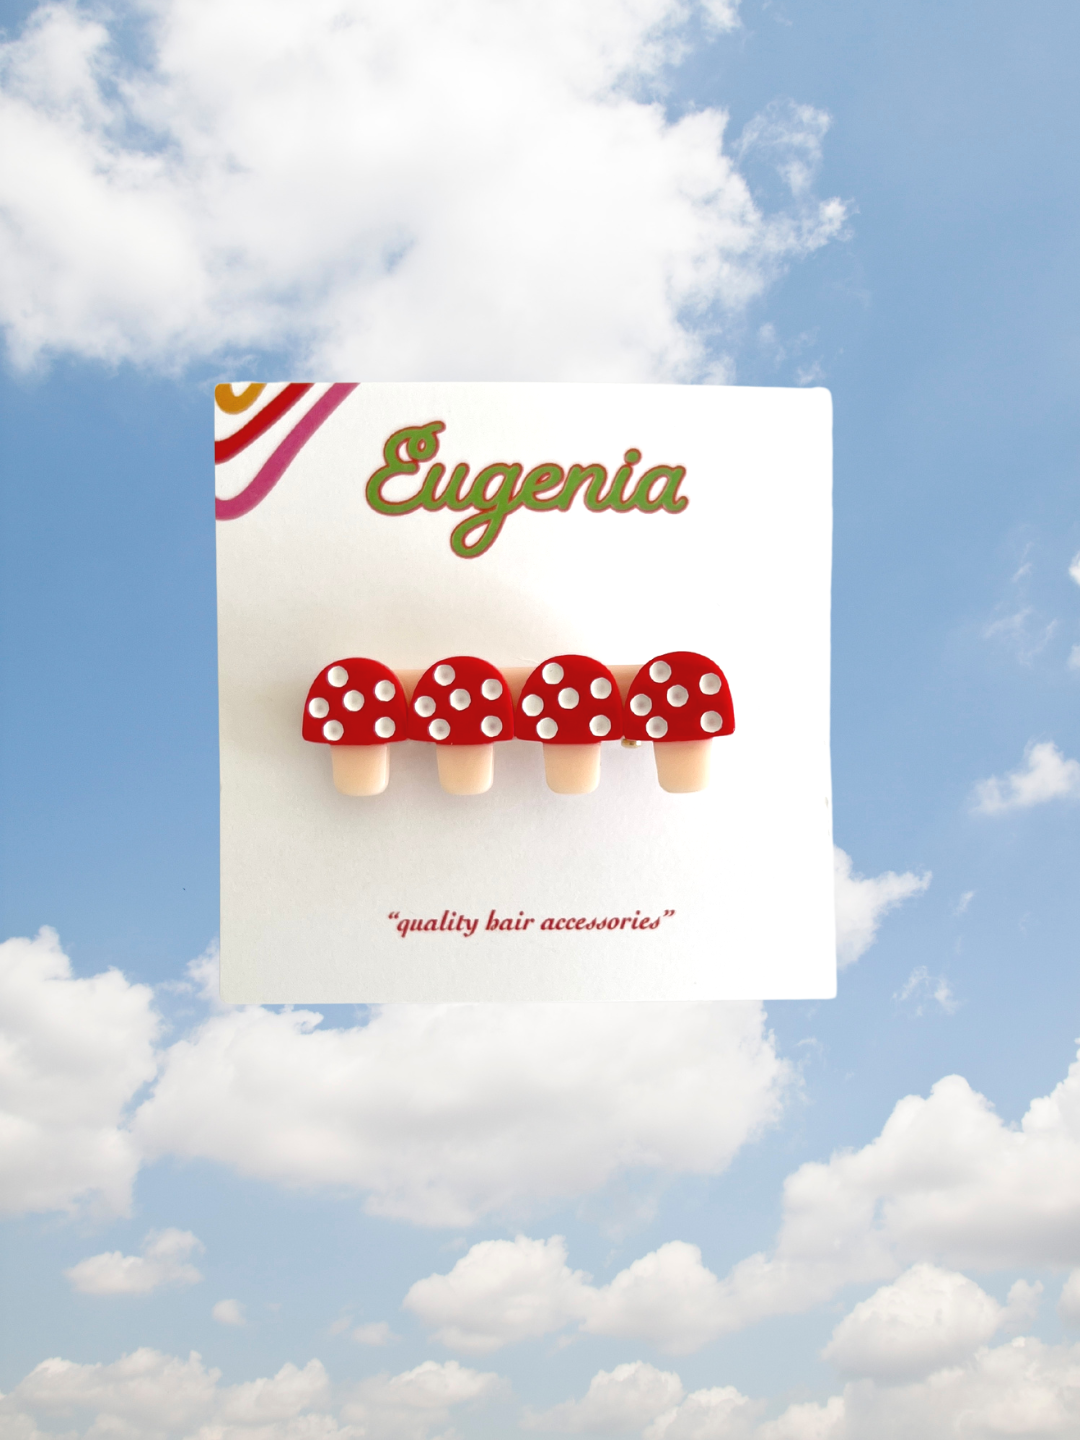 A presentation card of a kids' hair clip featuring four red toadstools with white spots